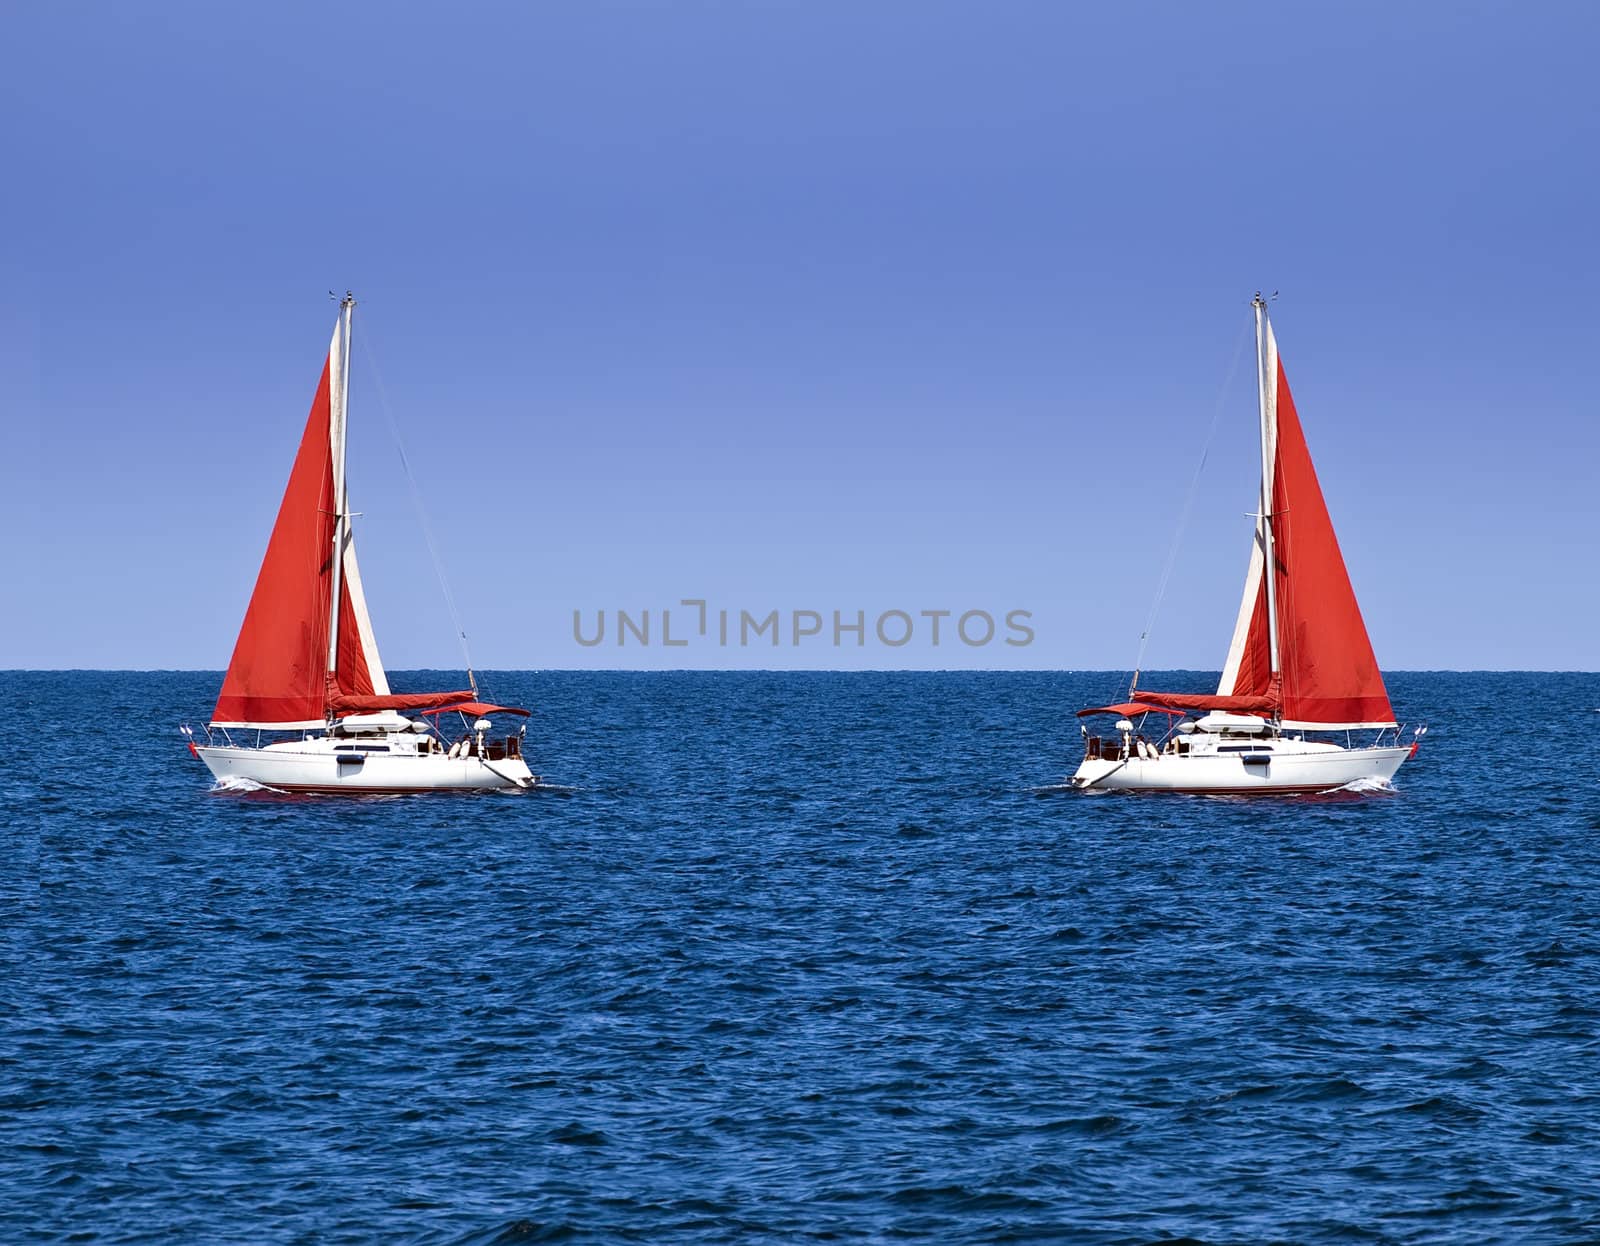 Yacht with a red sail offering crisp contrast against sky and ocean blue